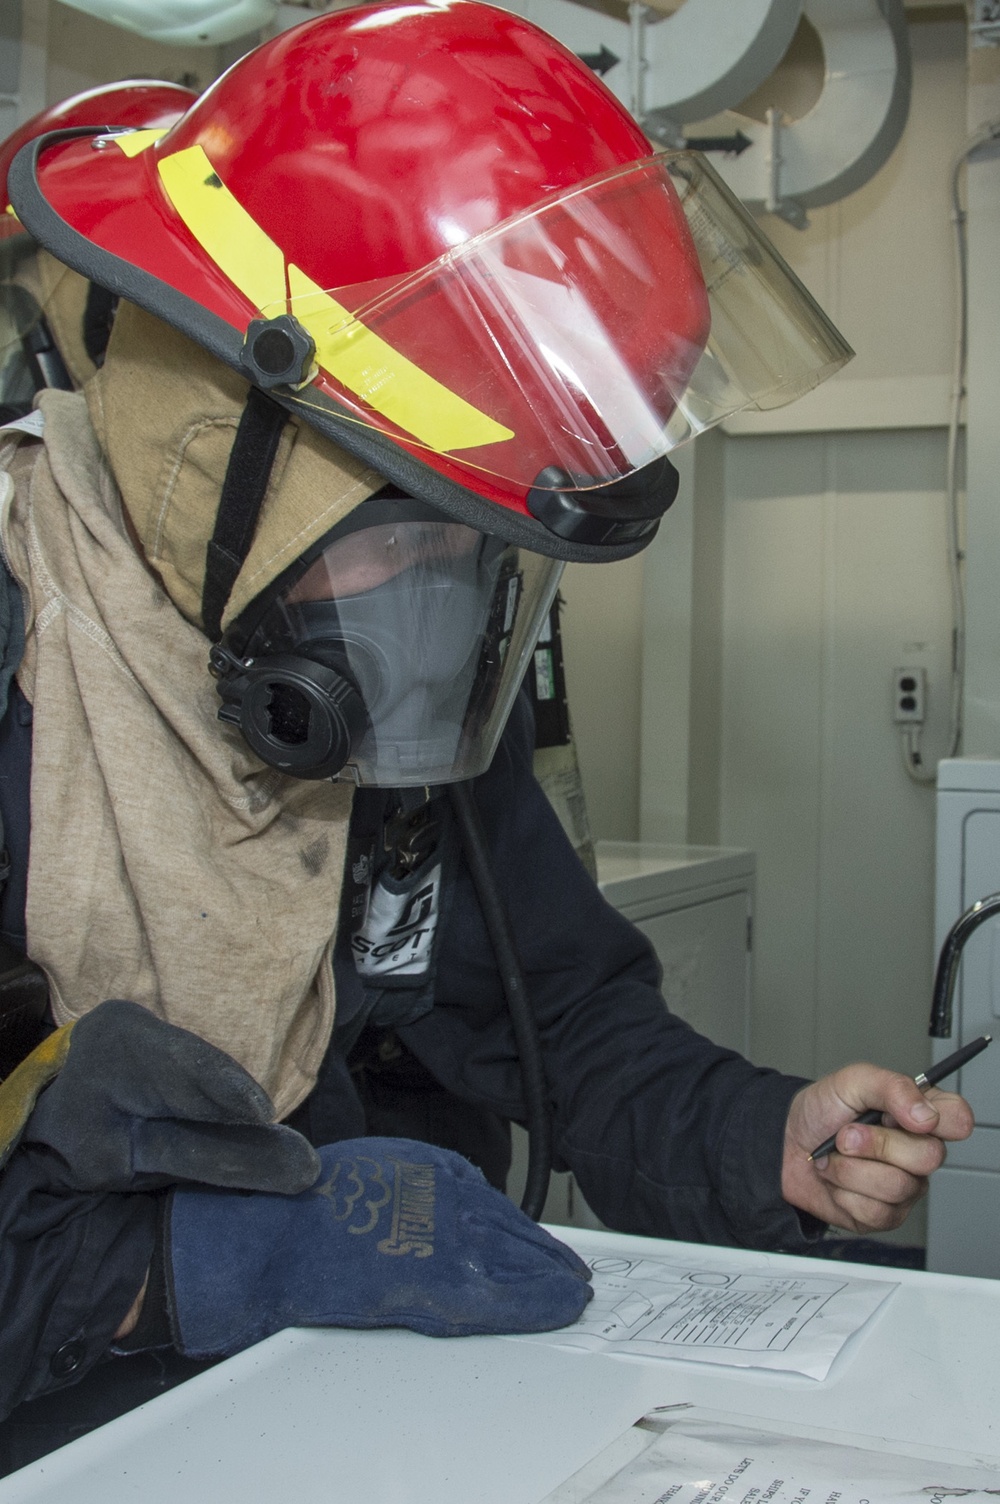 USS Bonhomme Richard (LHD 6) conducts a condition II Damage Control Drill